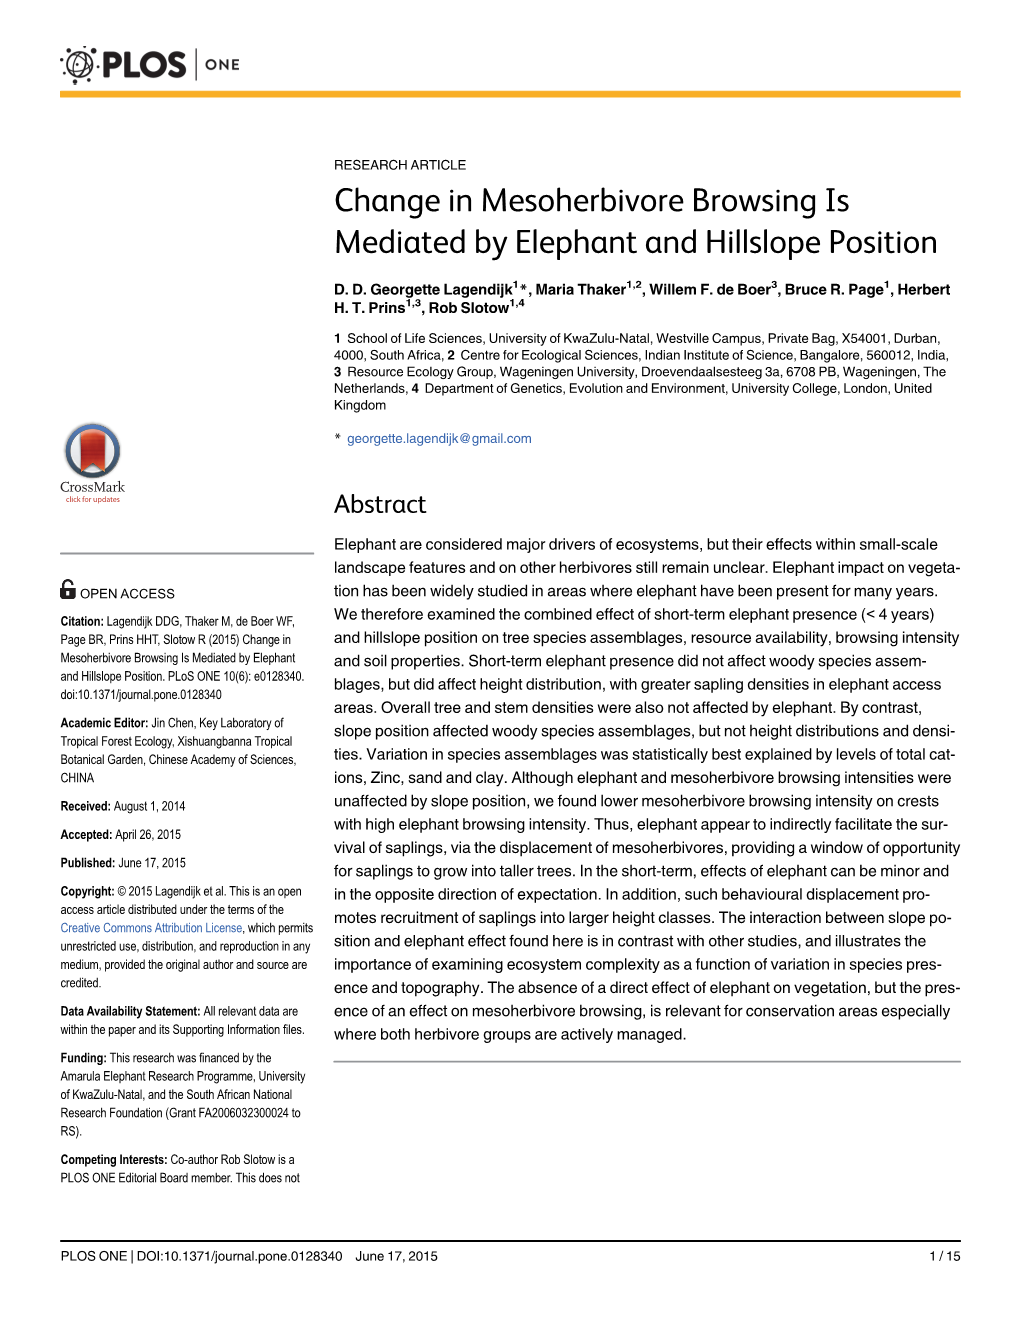 Change in Mesoherbivore Browsing Is Mediated by Elephant and Hillslope Position